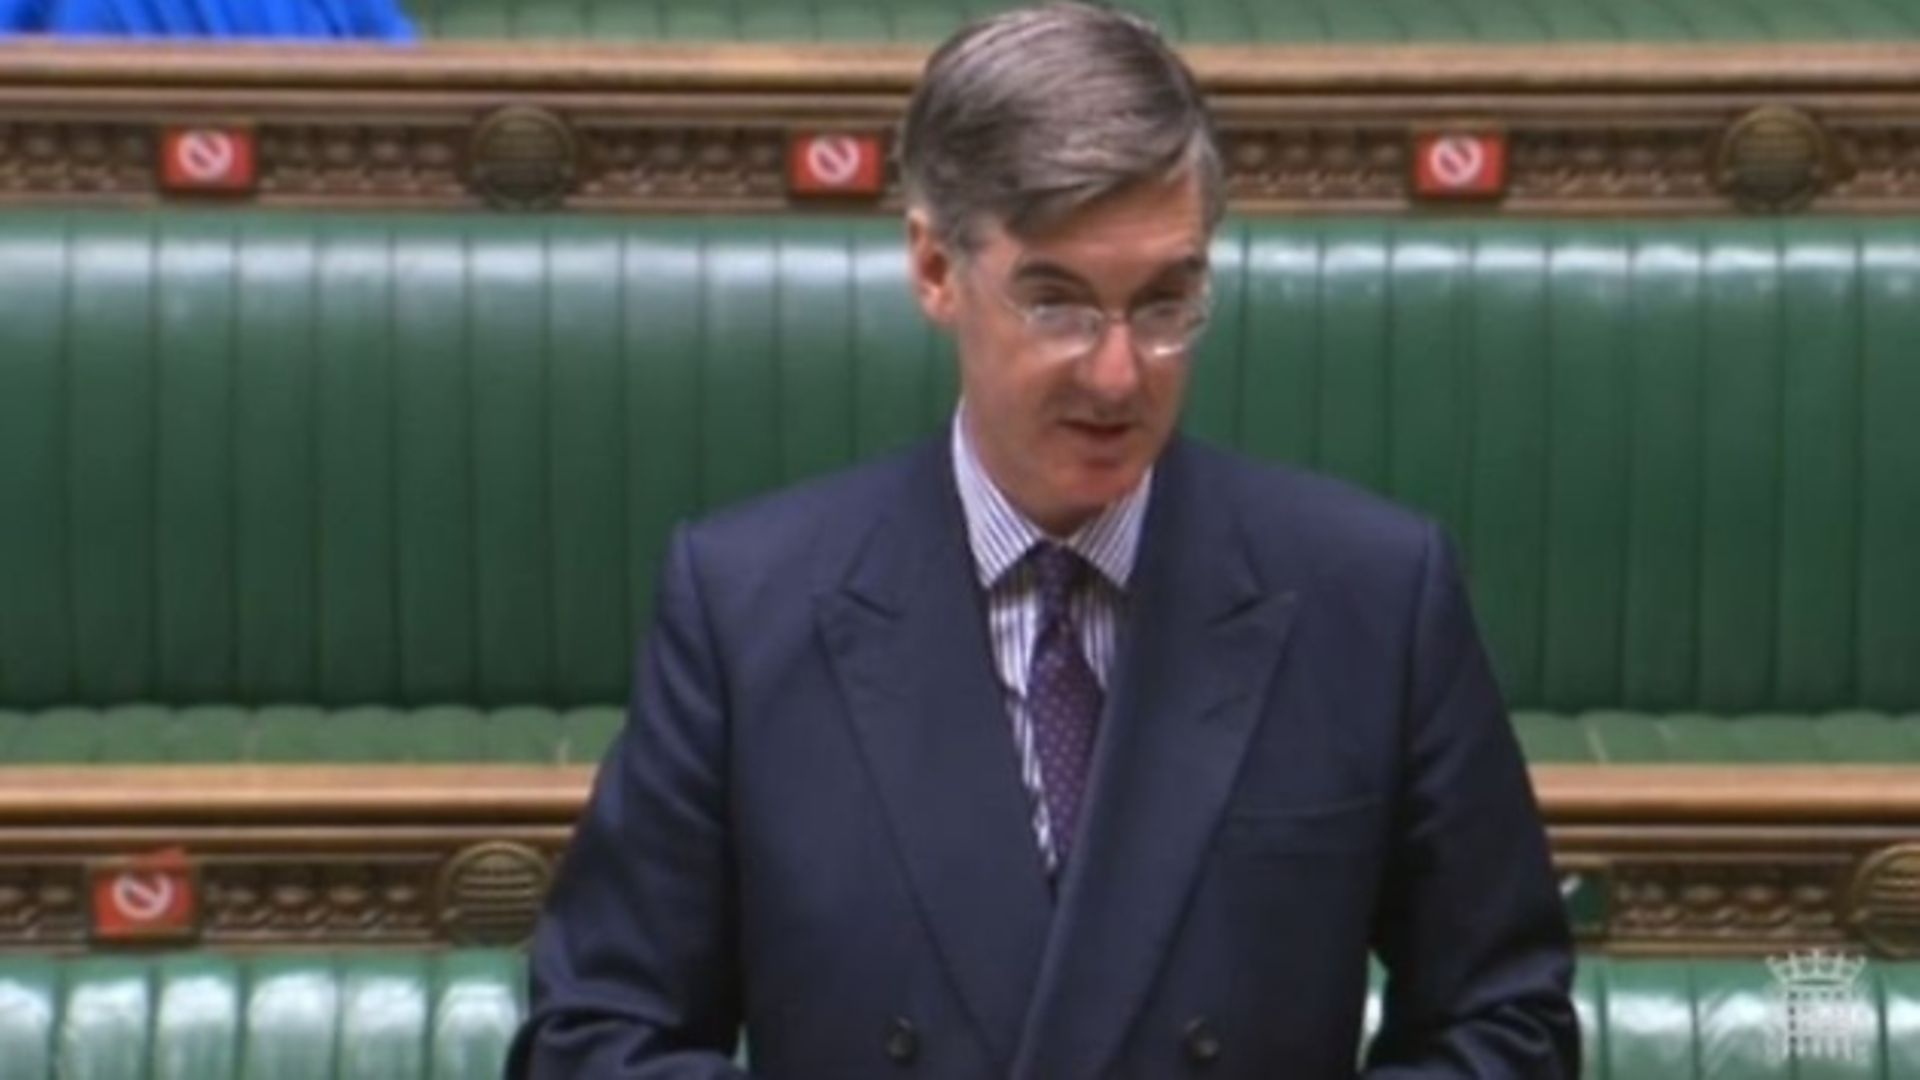 Jacob Rees-Mogg in the House of Commons - Credit: Parliamentlive.tv